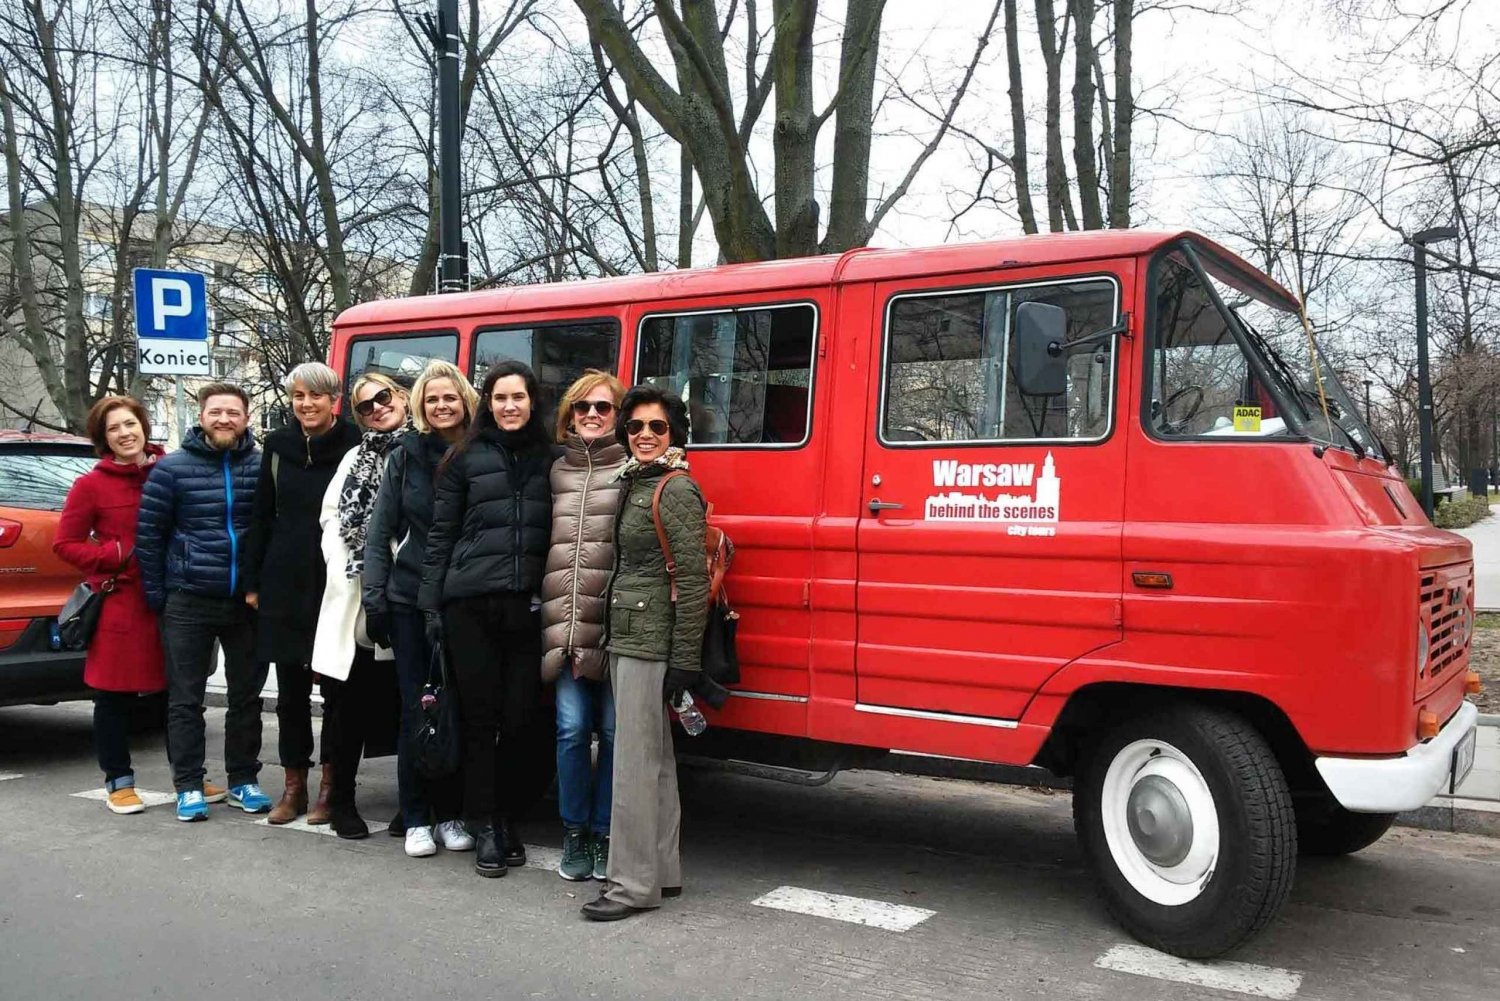 Warsaw: Jewish Ghetto Private Tour by Retro Car with Pickup